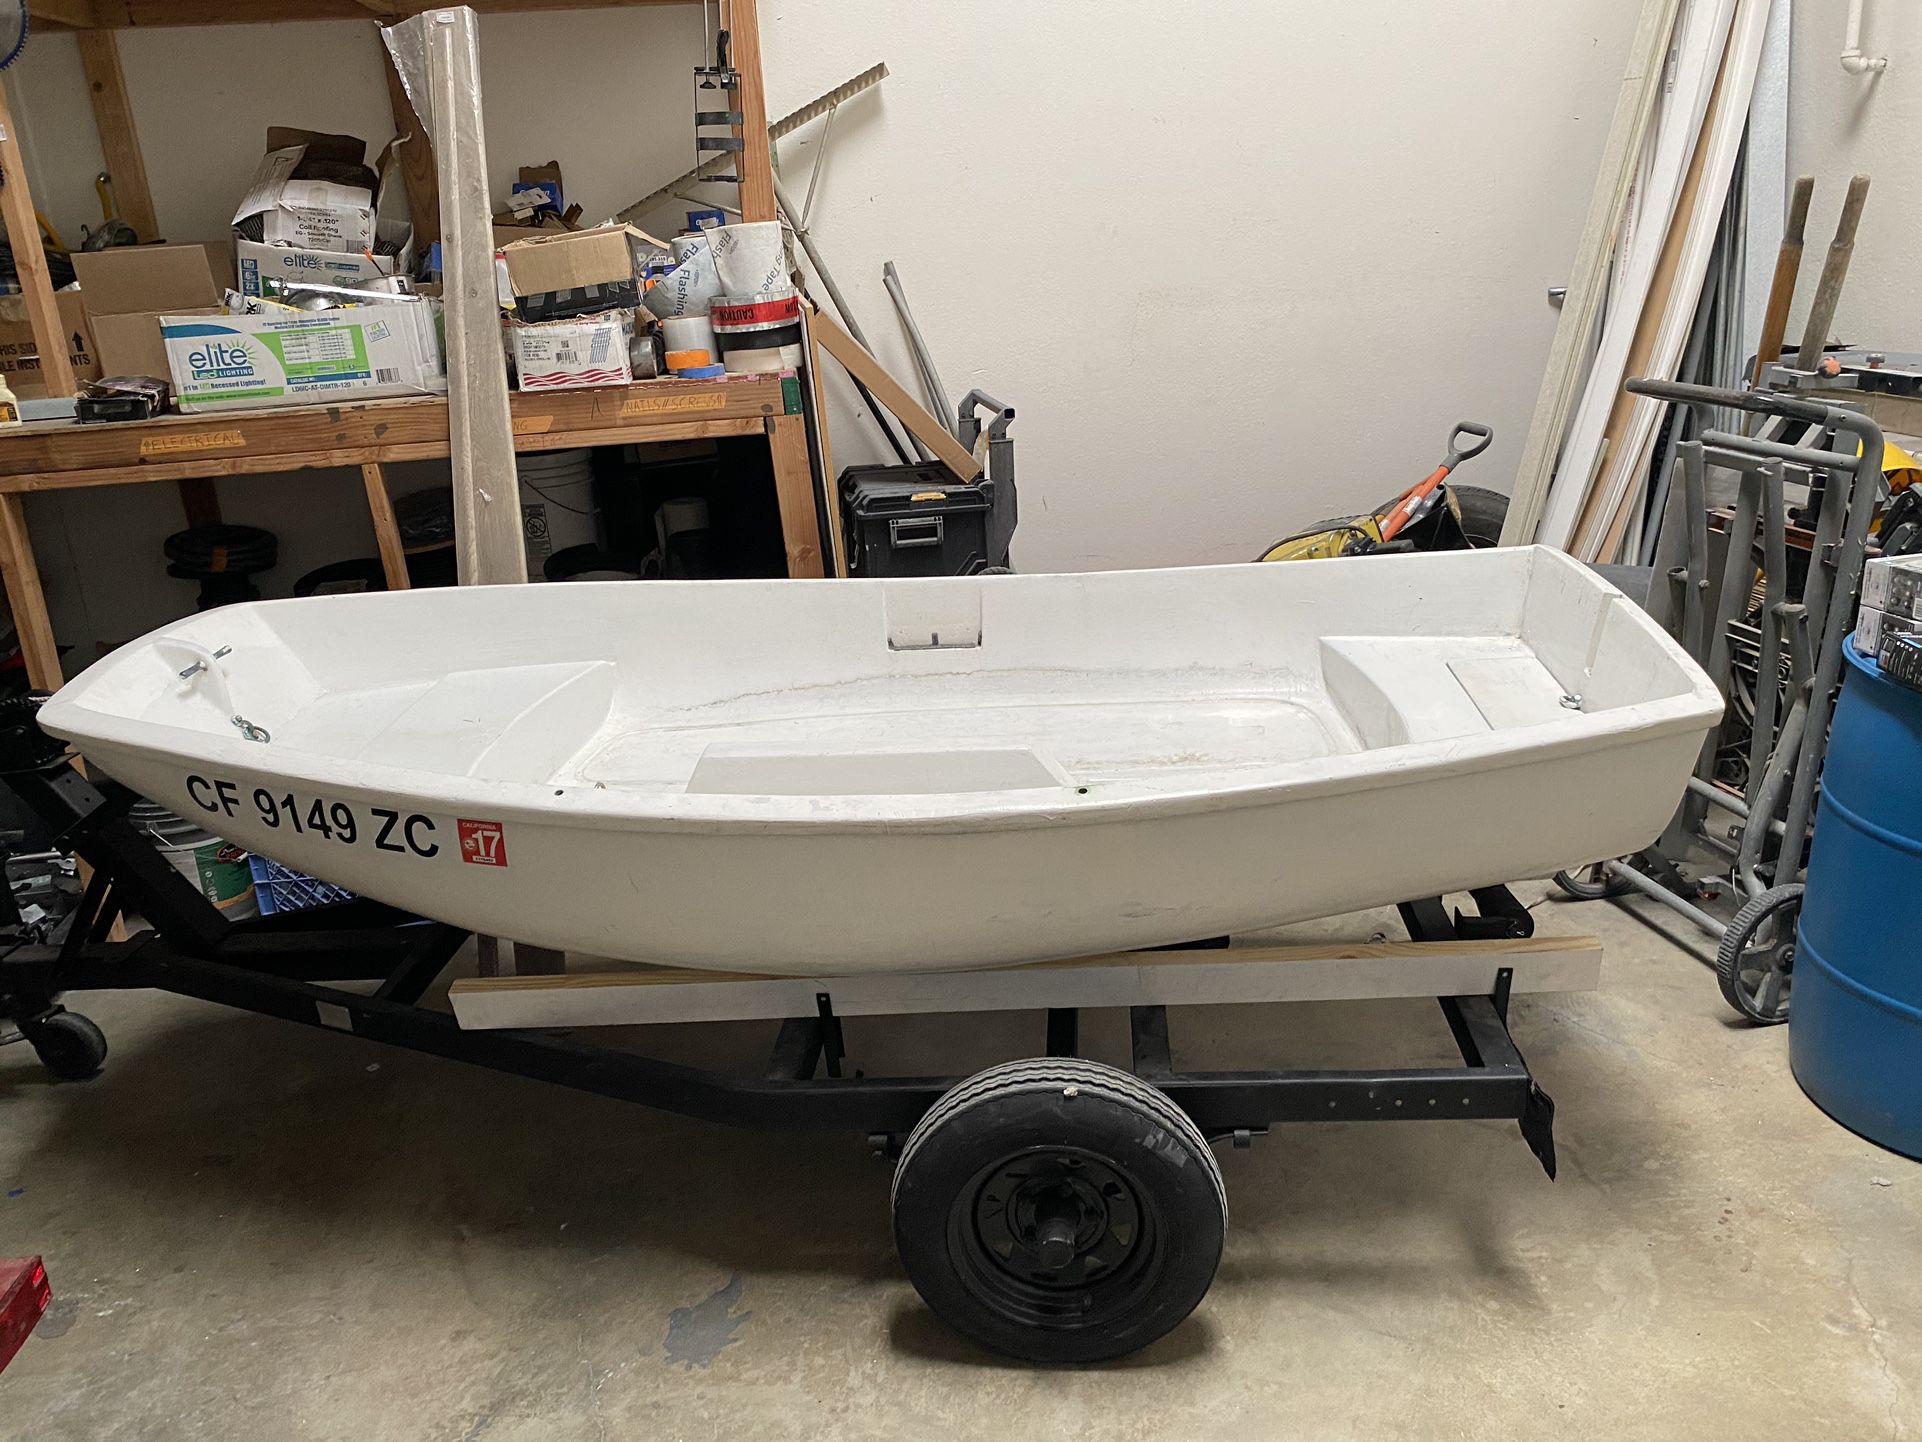 1960 Boston Whaler boat and trailer